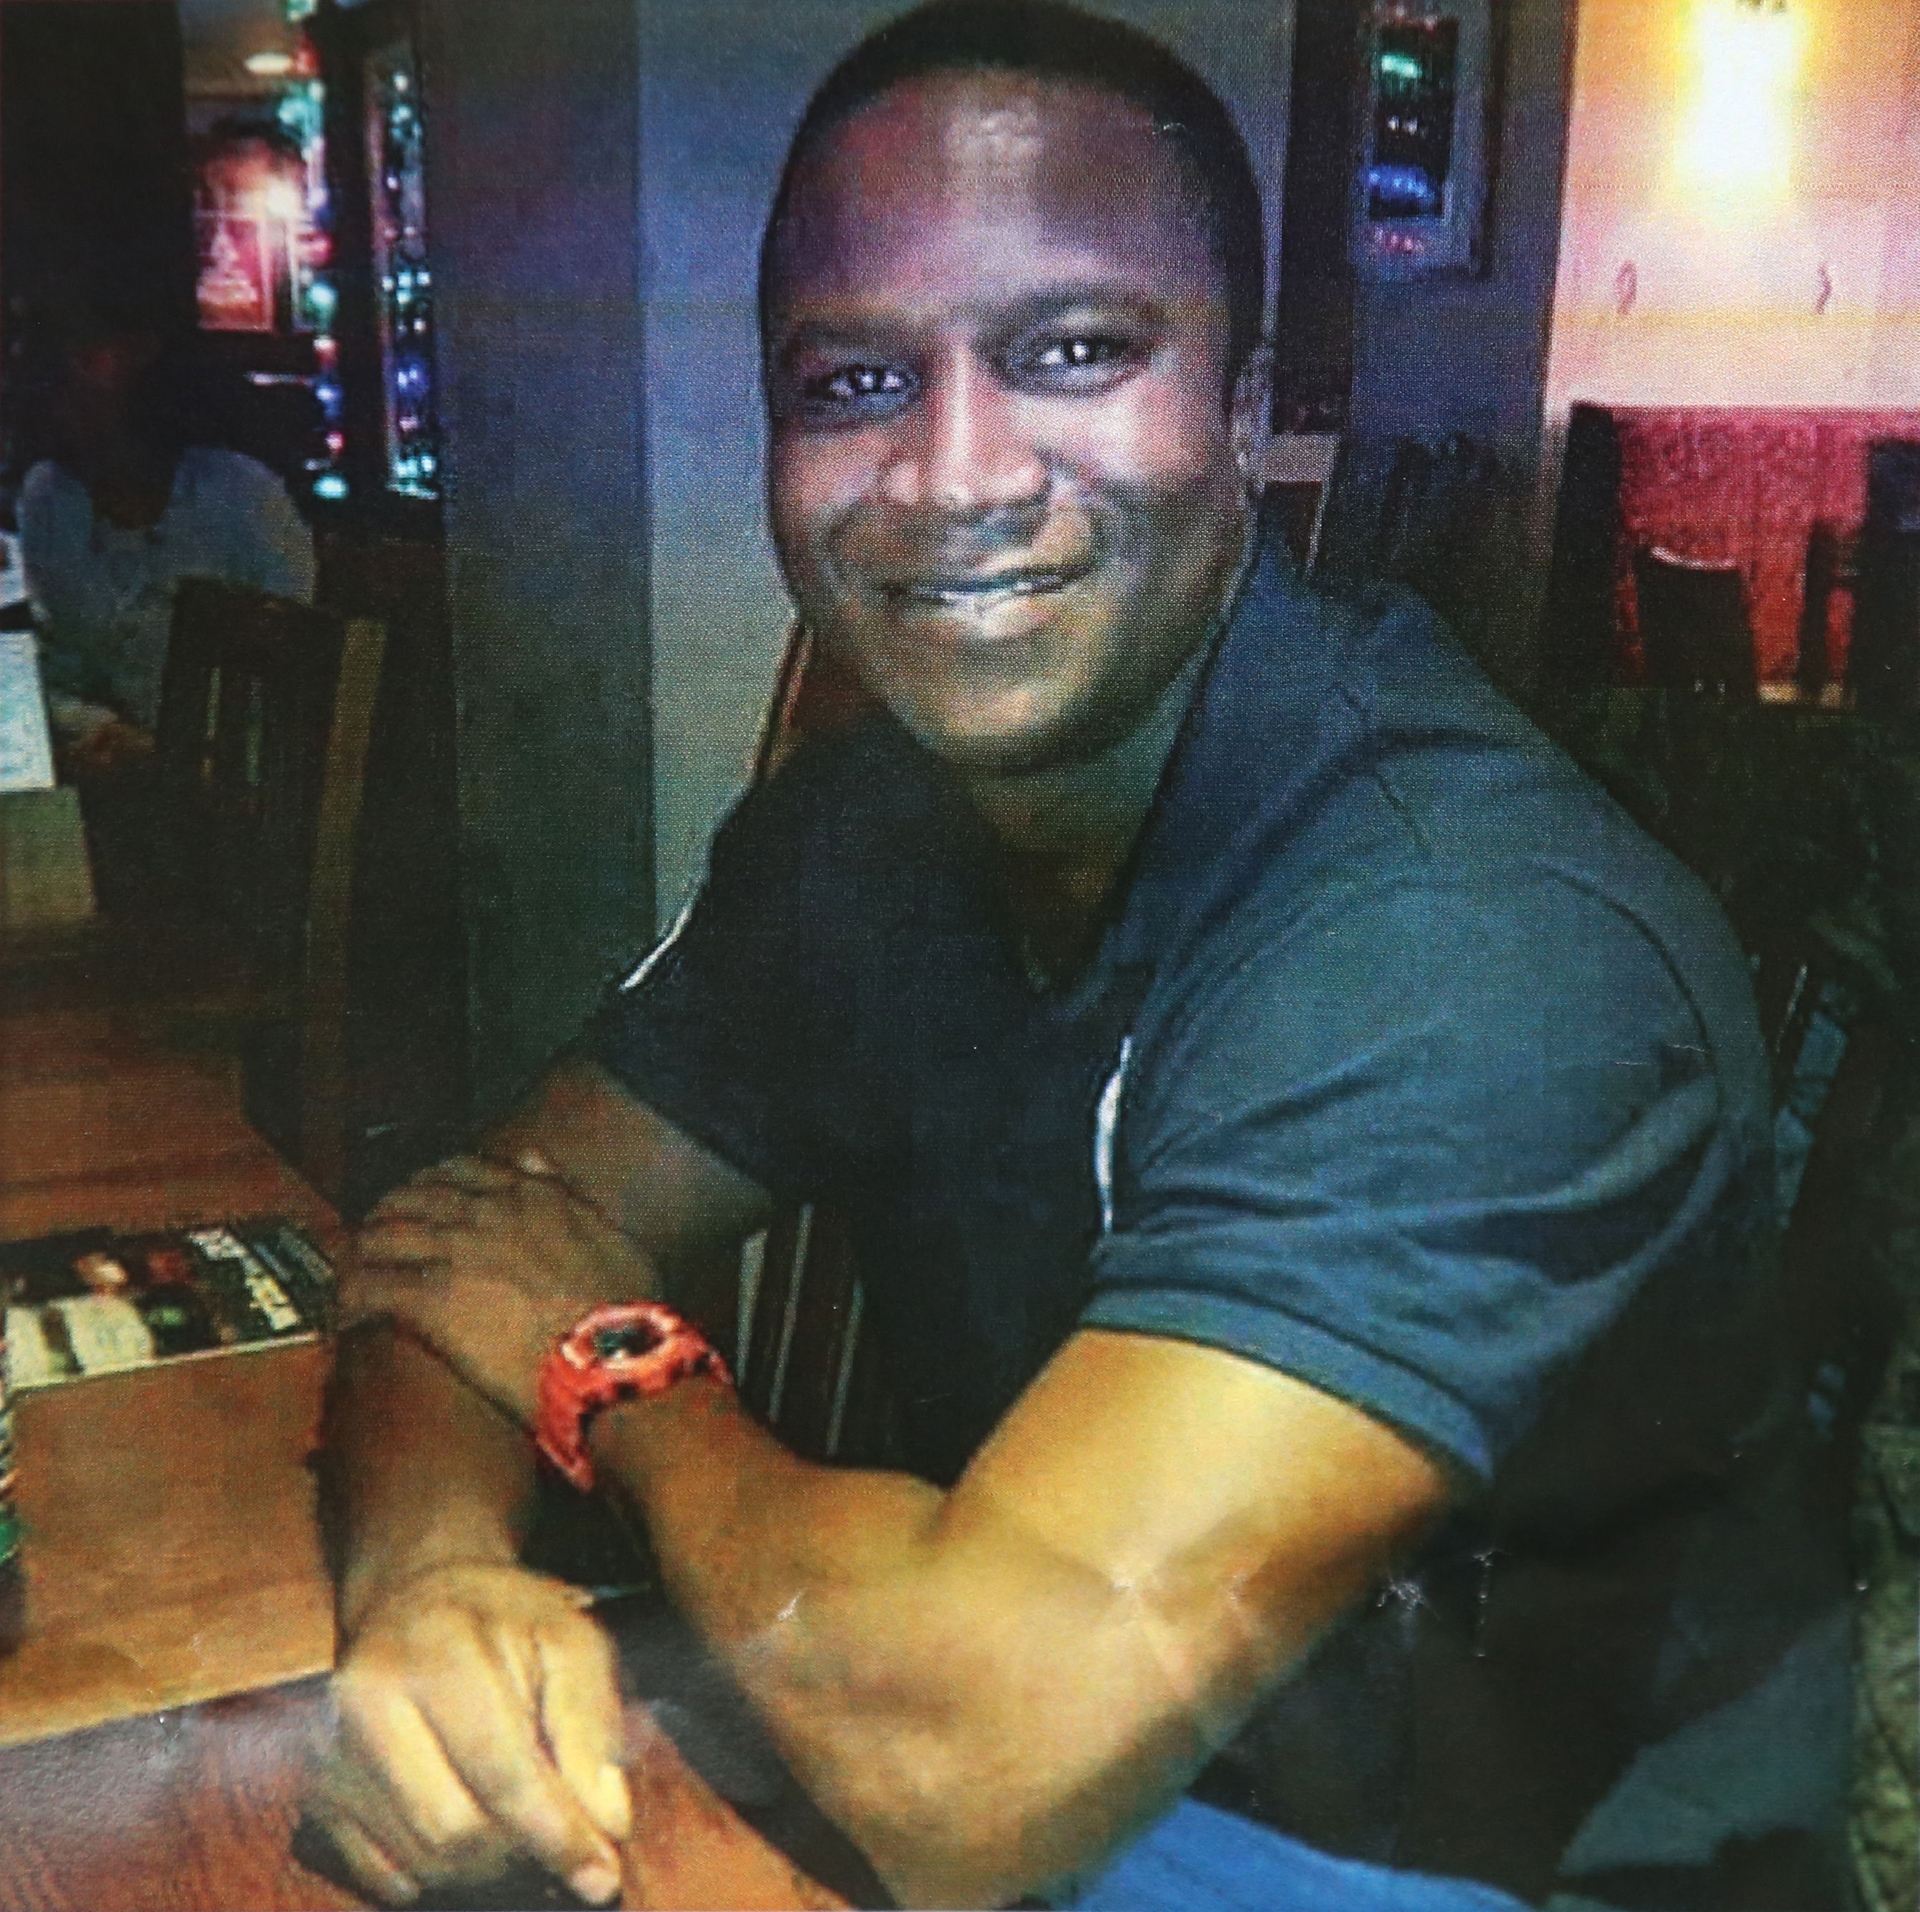 Sheku Bayoh died in police custody May 2015 while being restrained by officers who were responding to a call in Kirkcaldy, Fife.